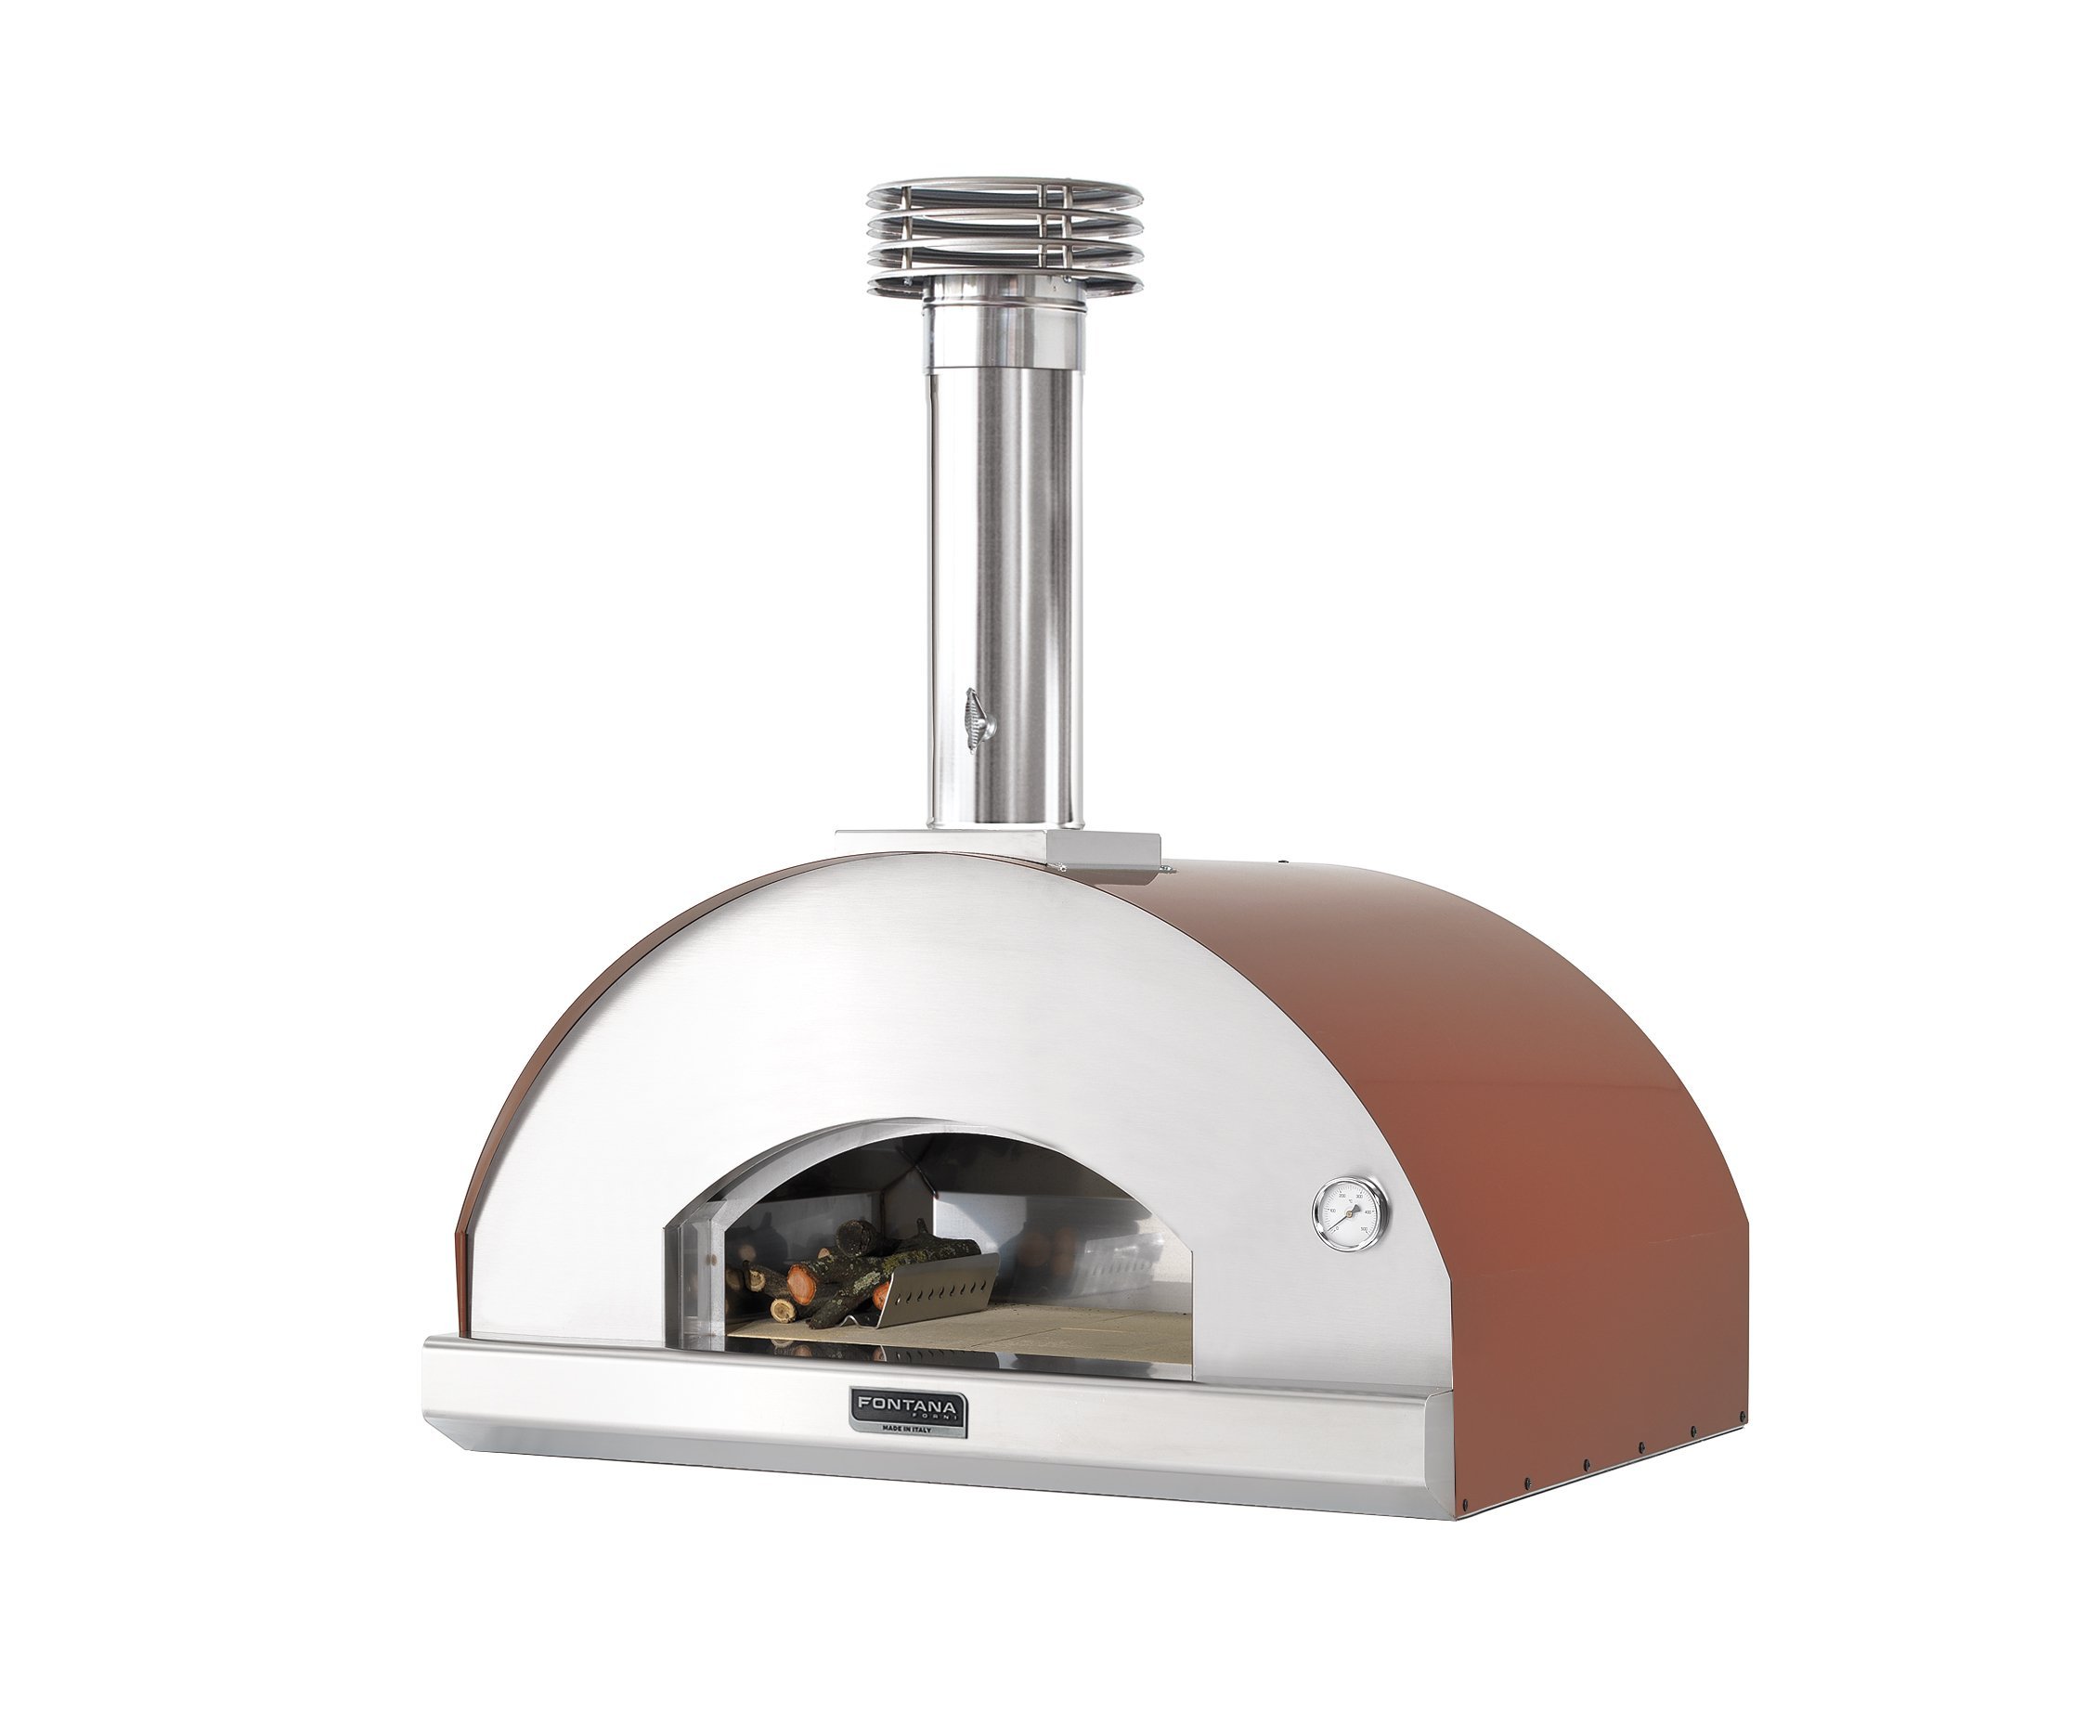 Dome oven Fontana Mangiafuoco with wood firing, outdoor kitchen pizza oven, red